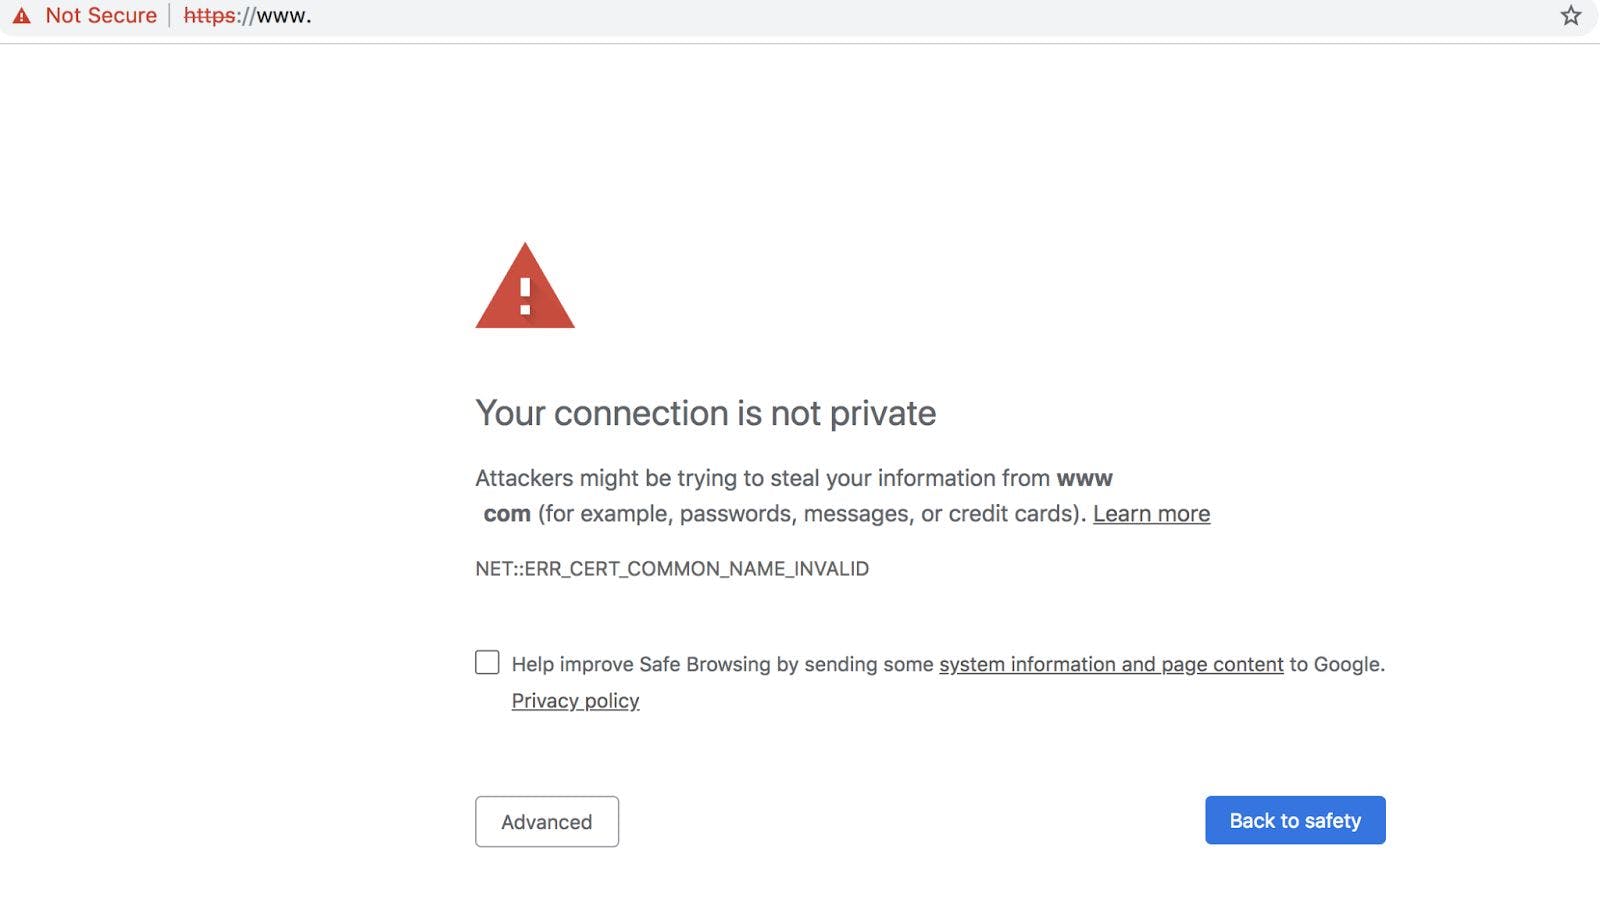 http connection is not private